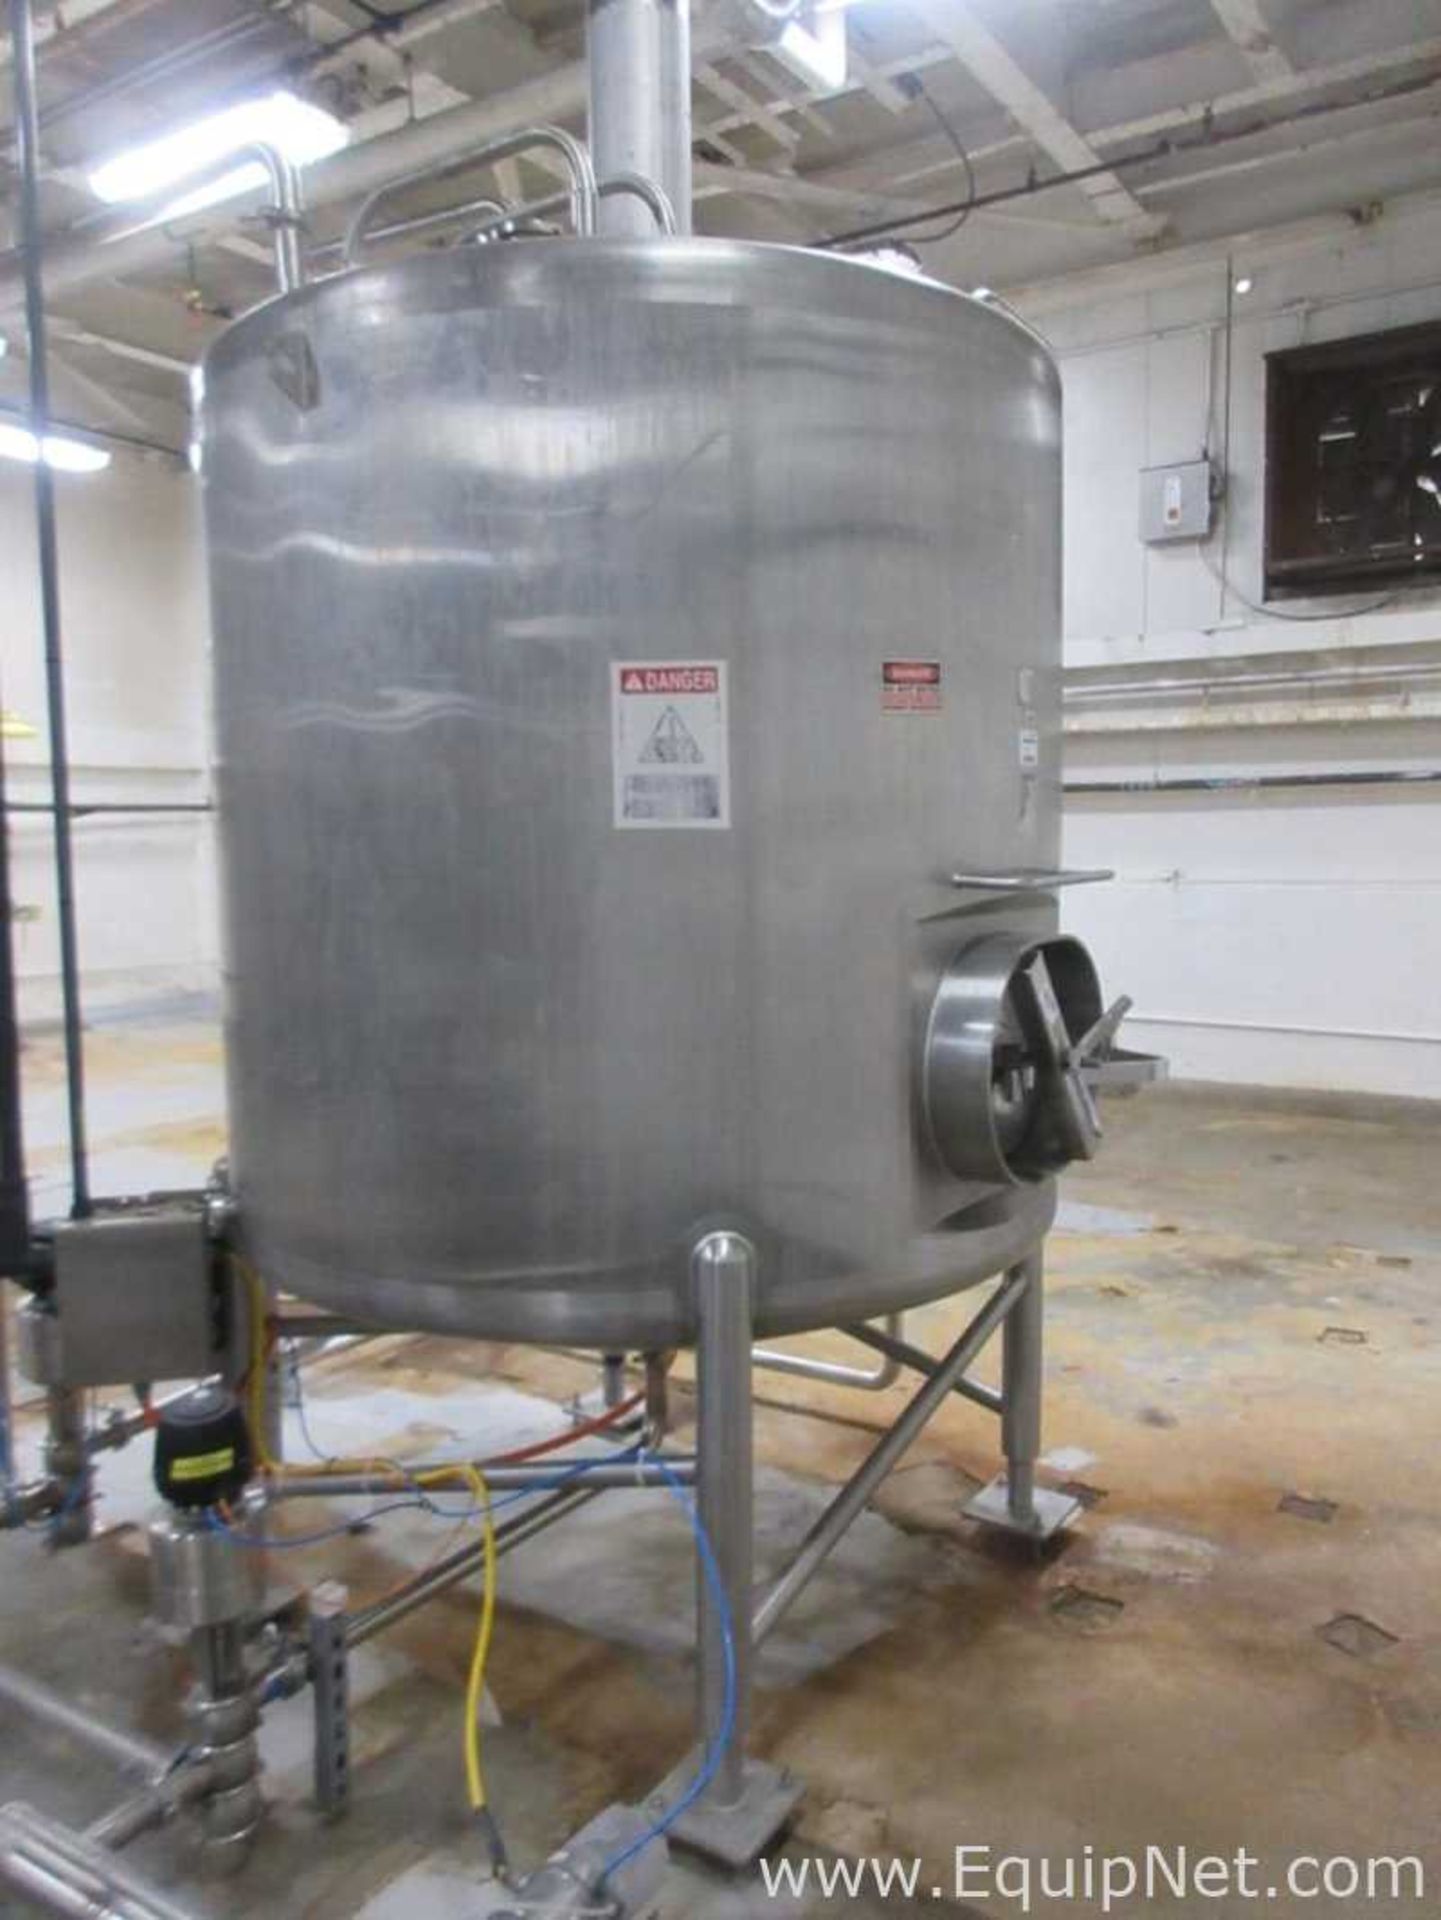 750 Gallon Cherry Burrell Stainless Steel Tank - Image 3 of 7